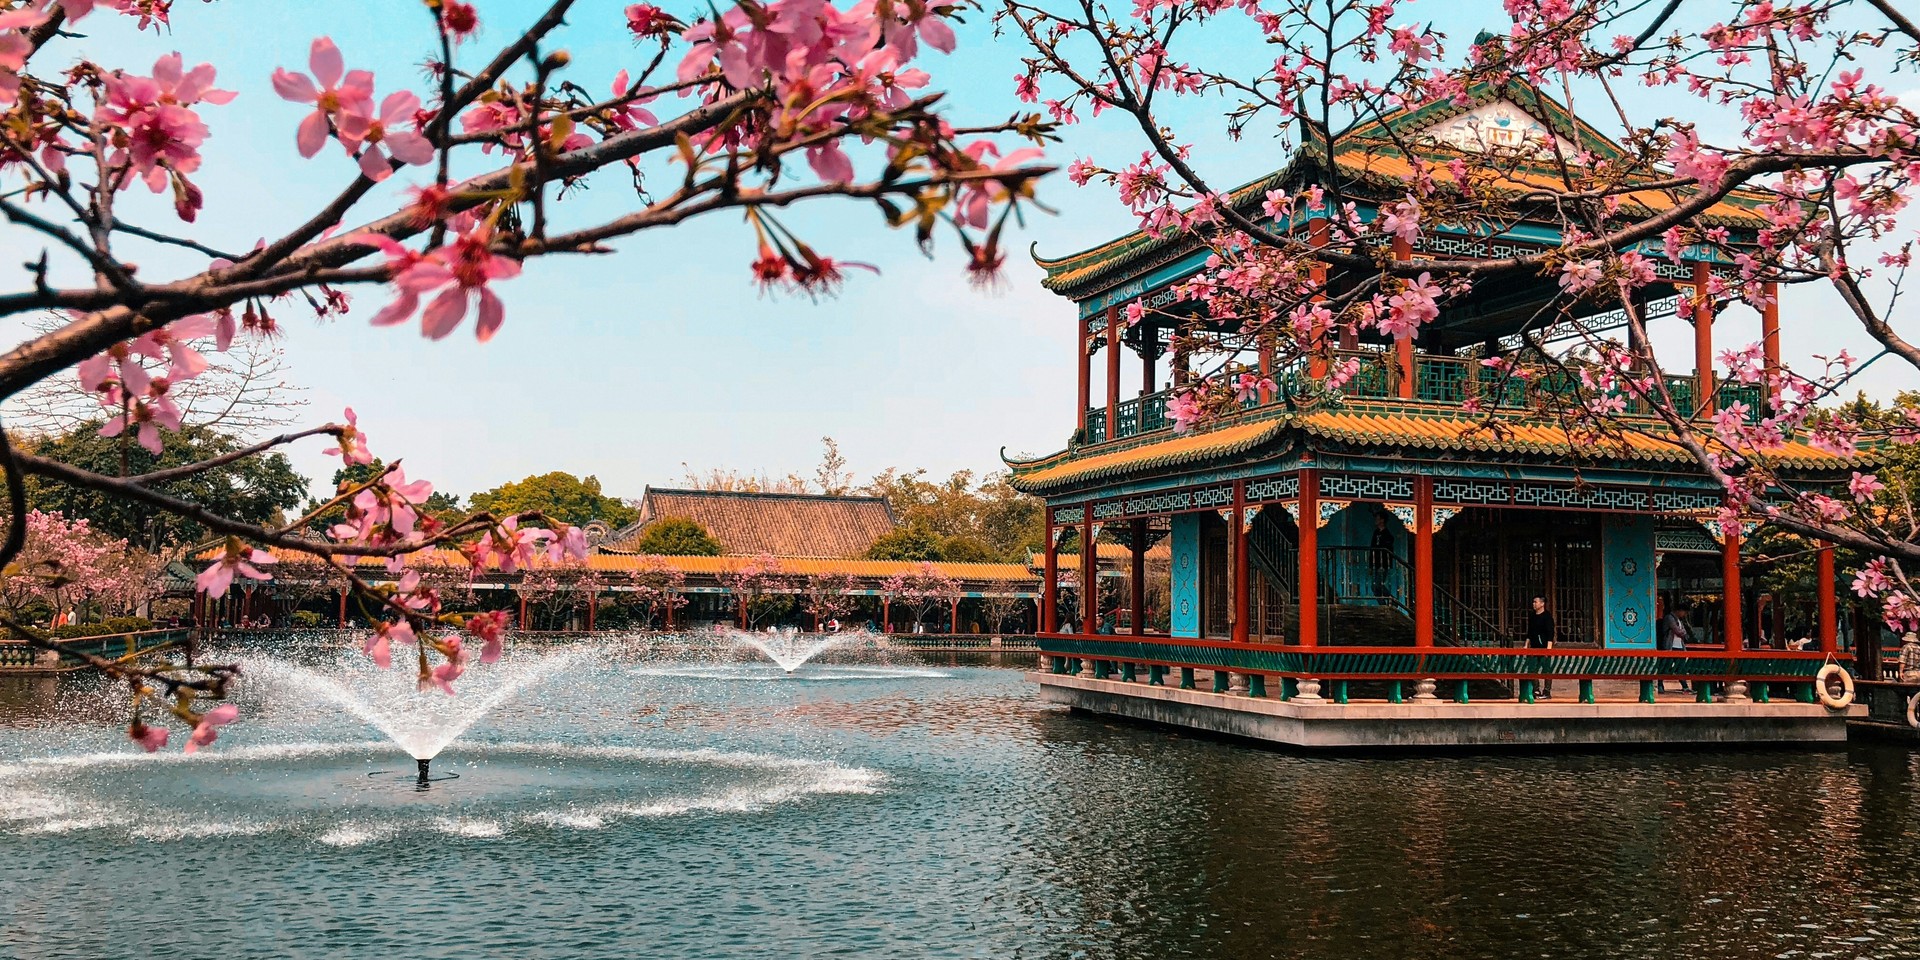 9 REASONS TO LIVE IN A SMALLER CHINESE CITY